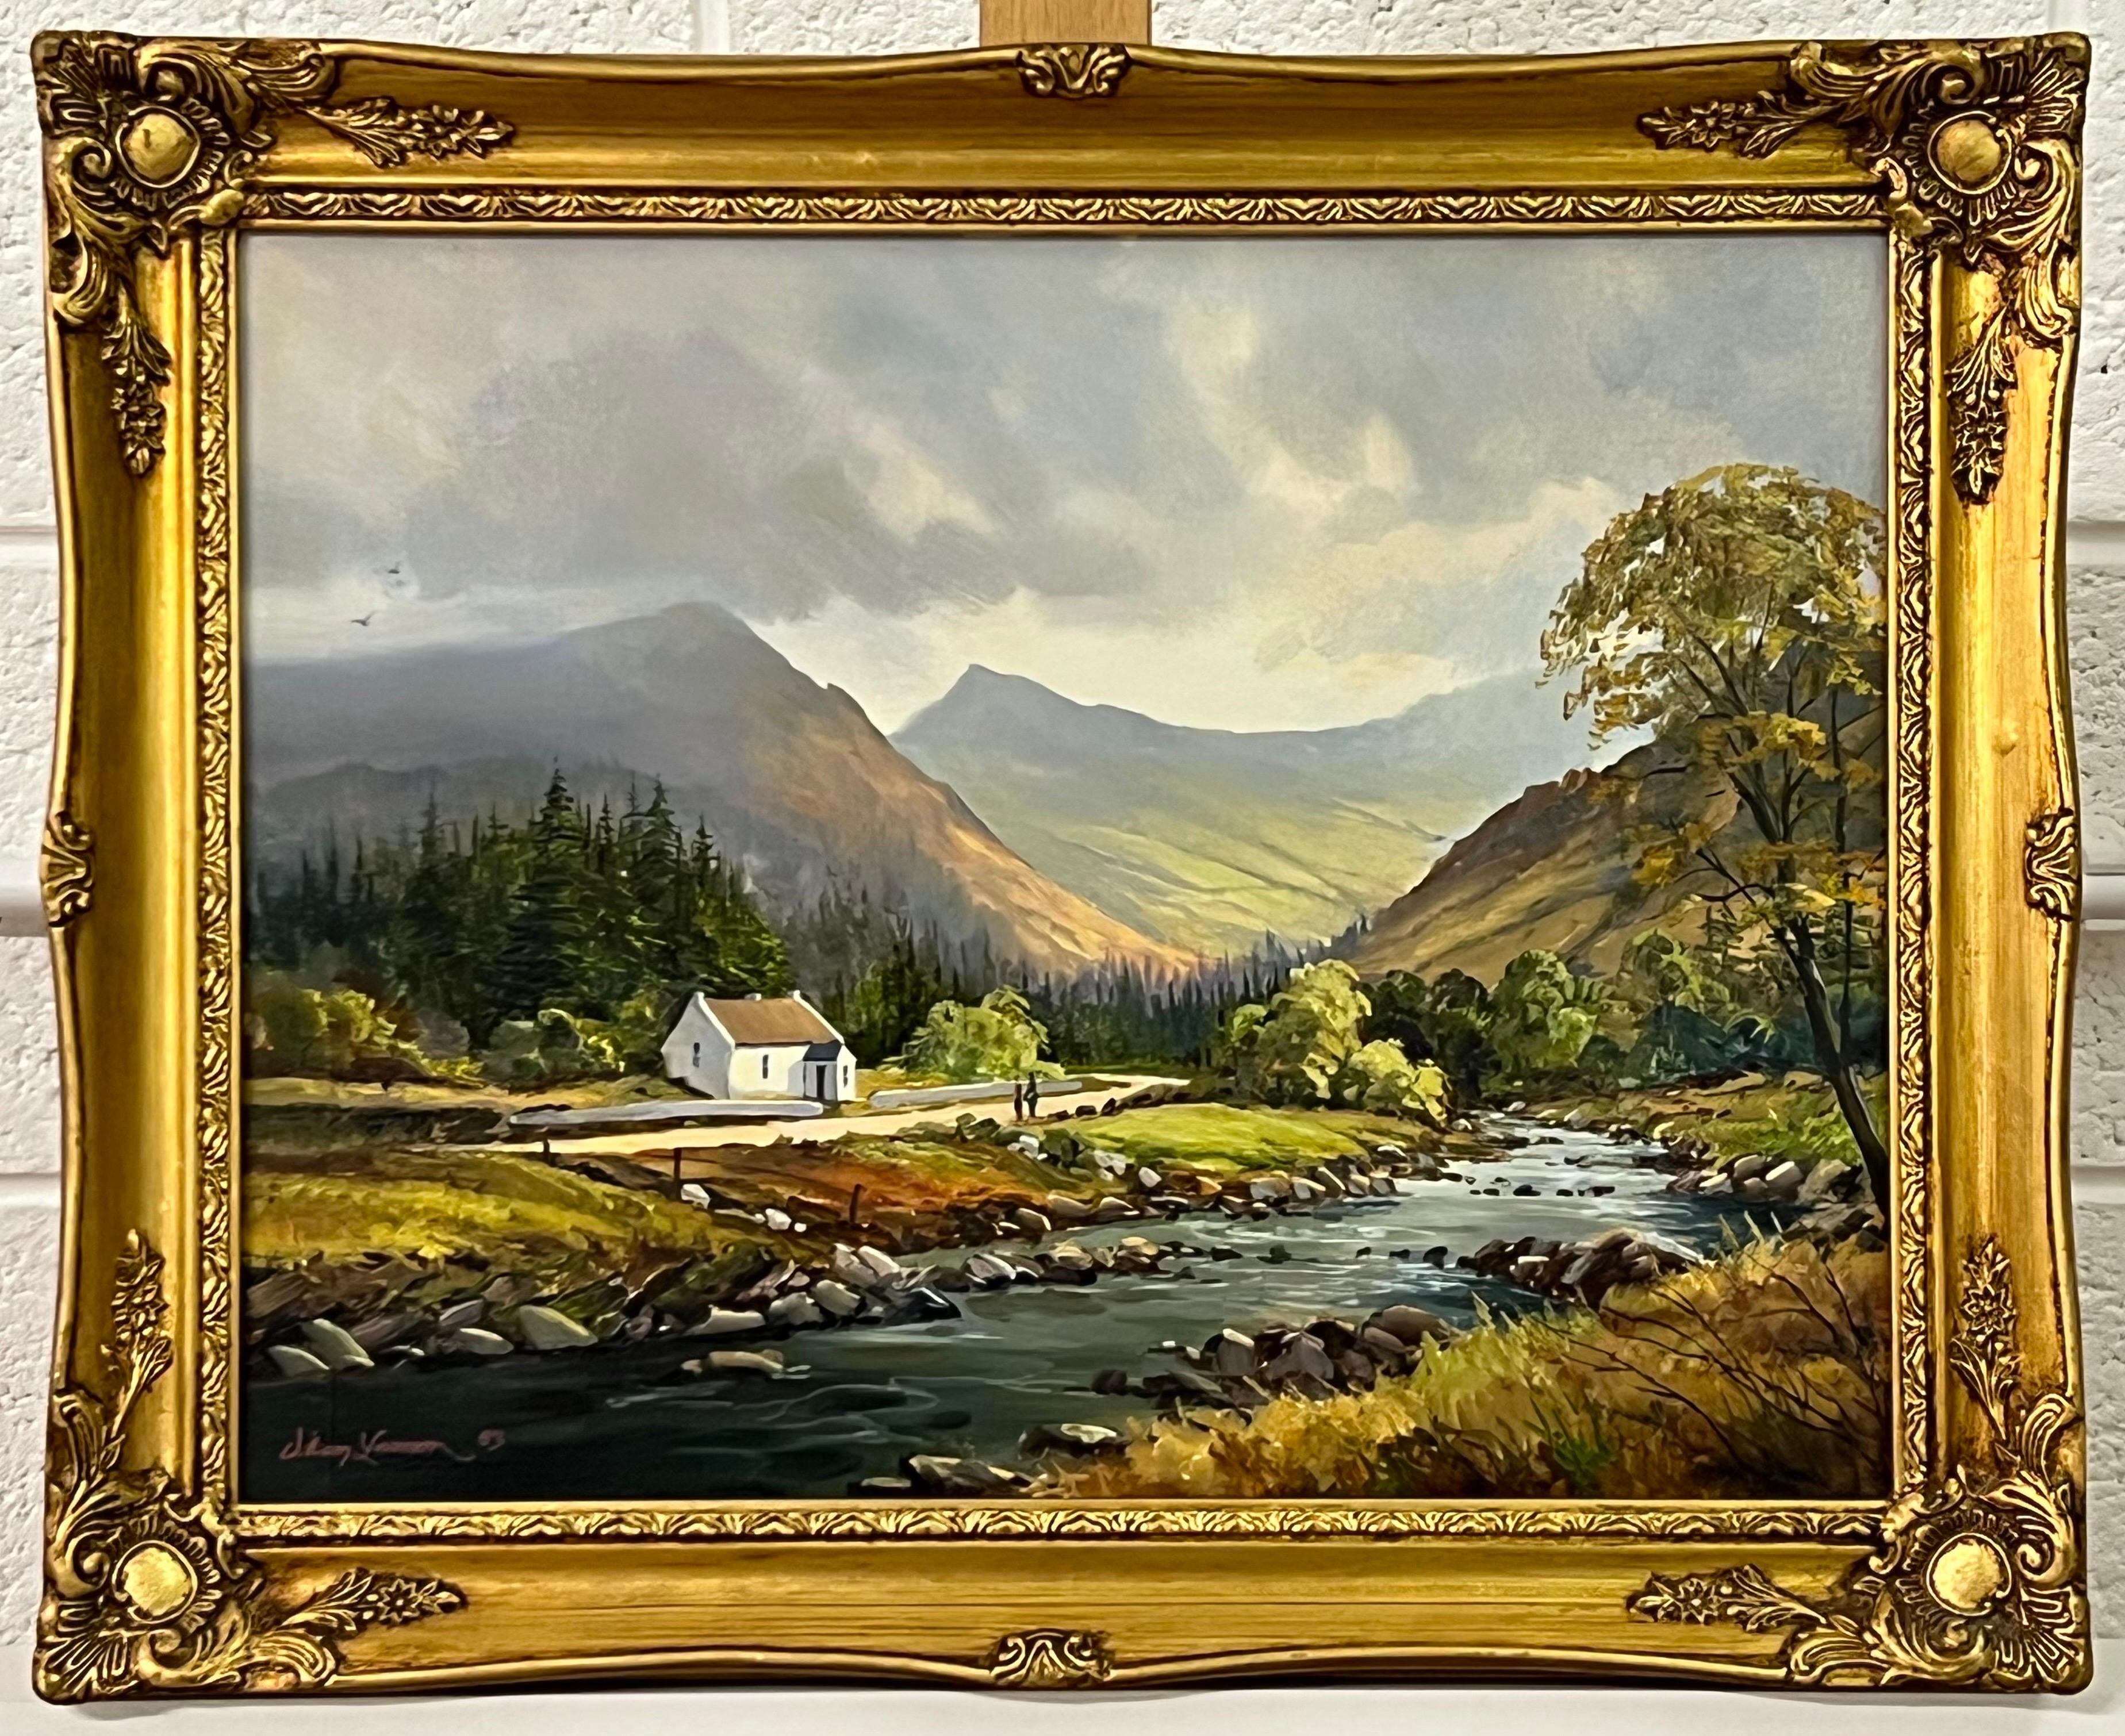 Figures by a River Cottage in the Irish Mountain Landscape with Lush Green Trees 2